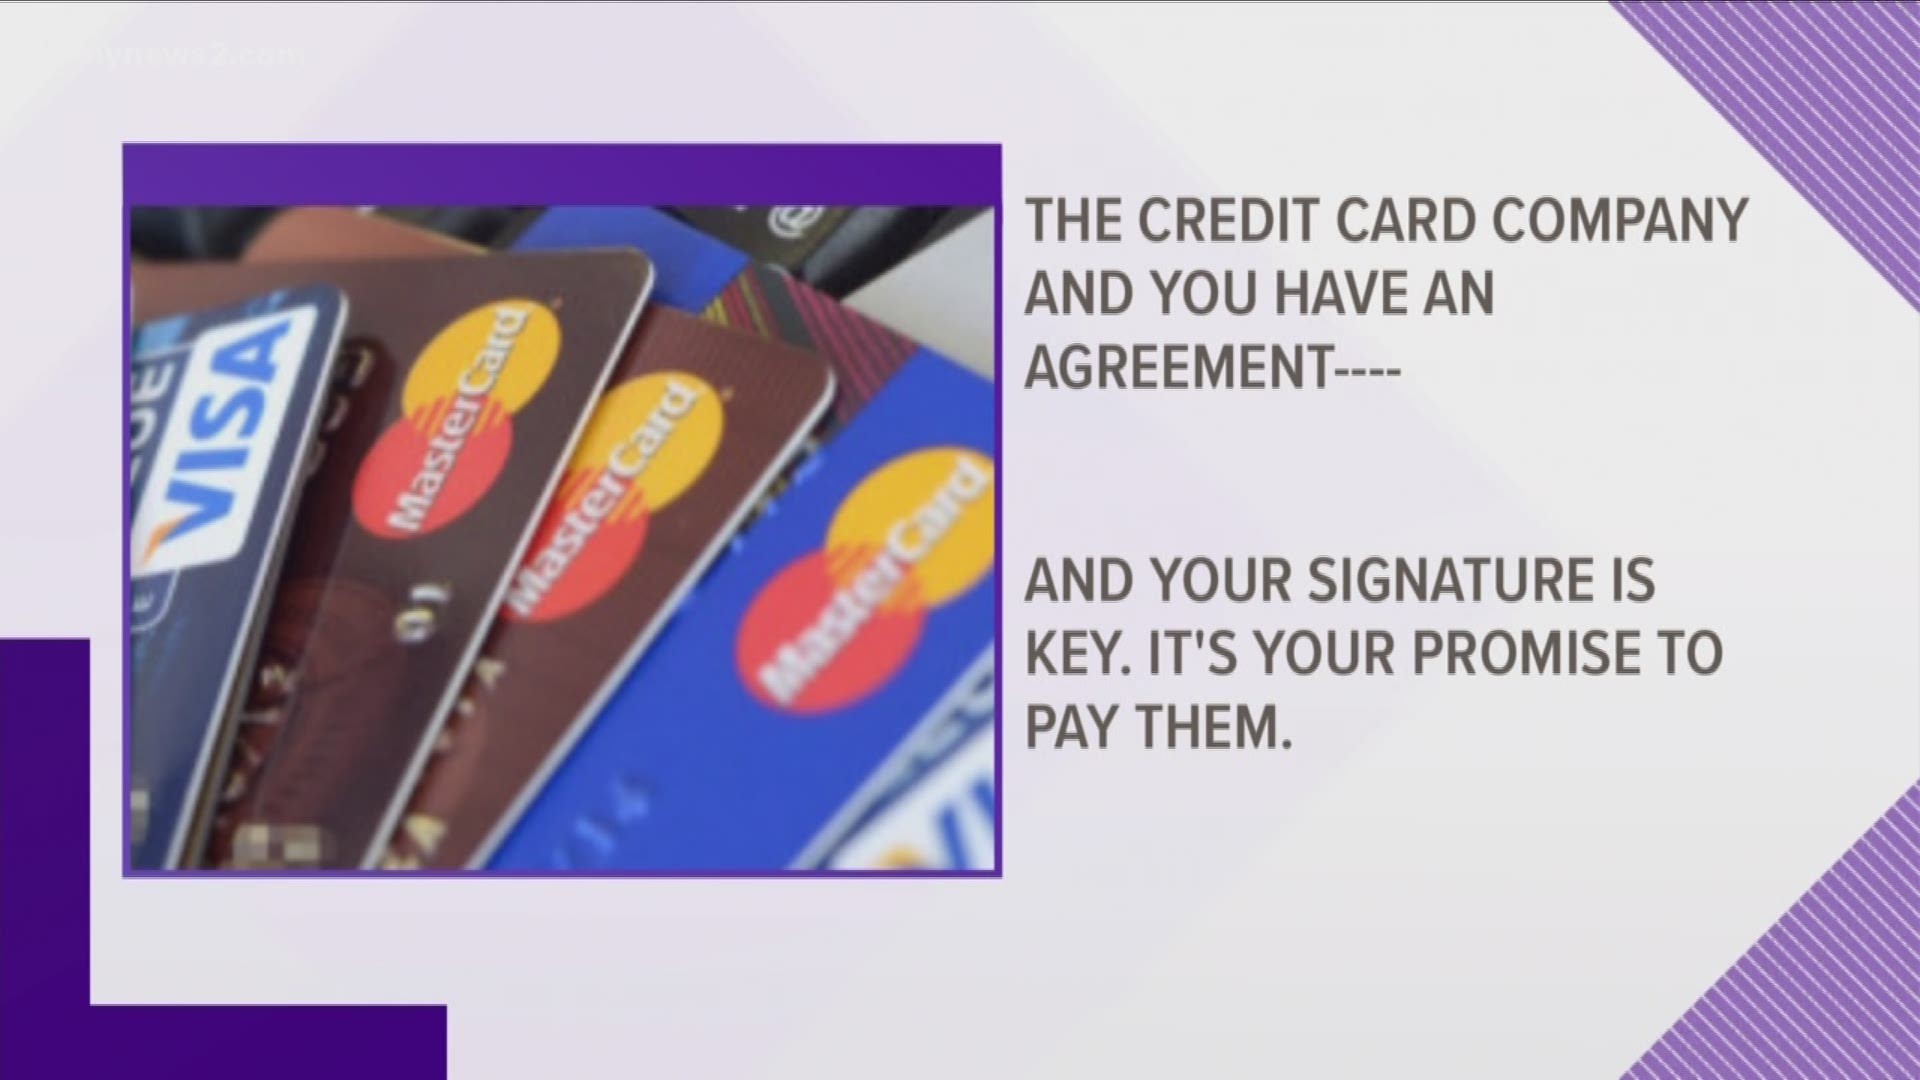 A viewer asked us why IDs aren't required when using a credit card, and it all states with the credit card companies.